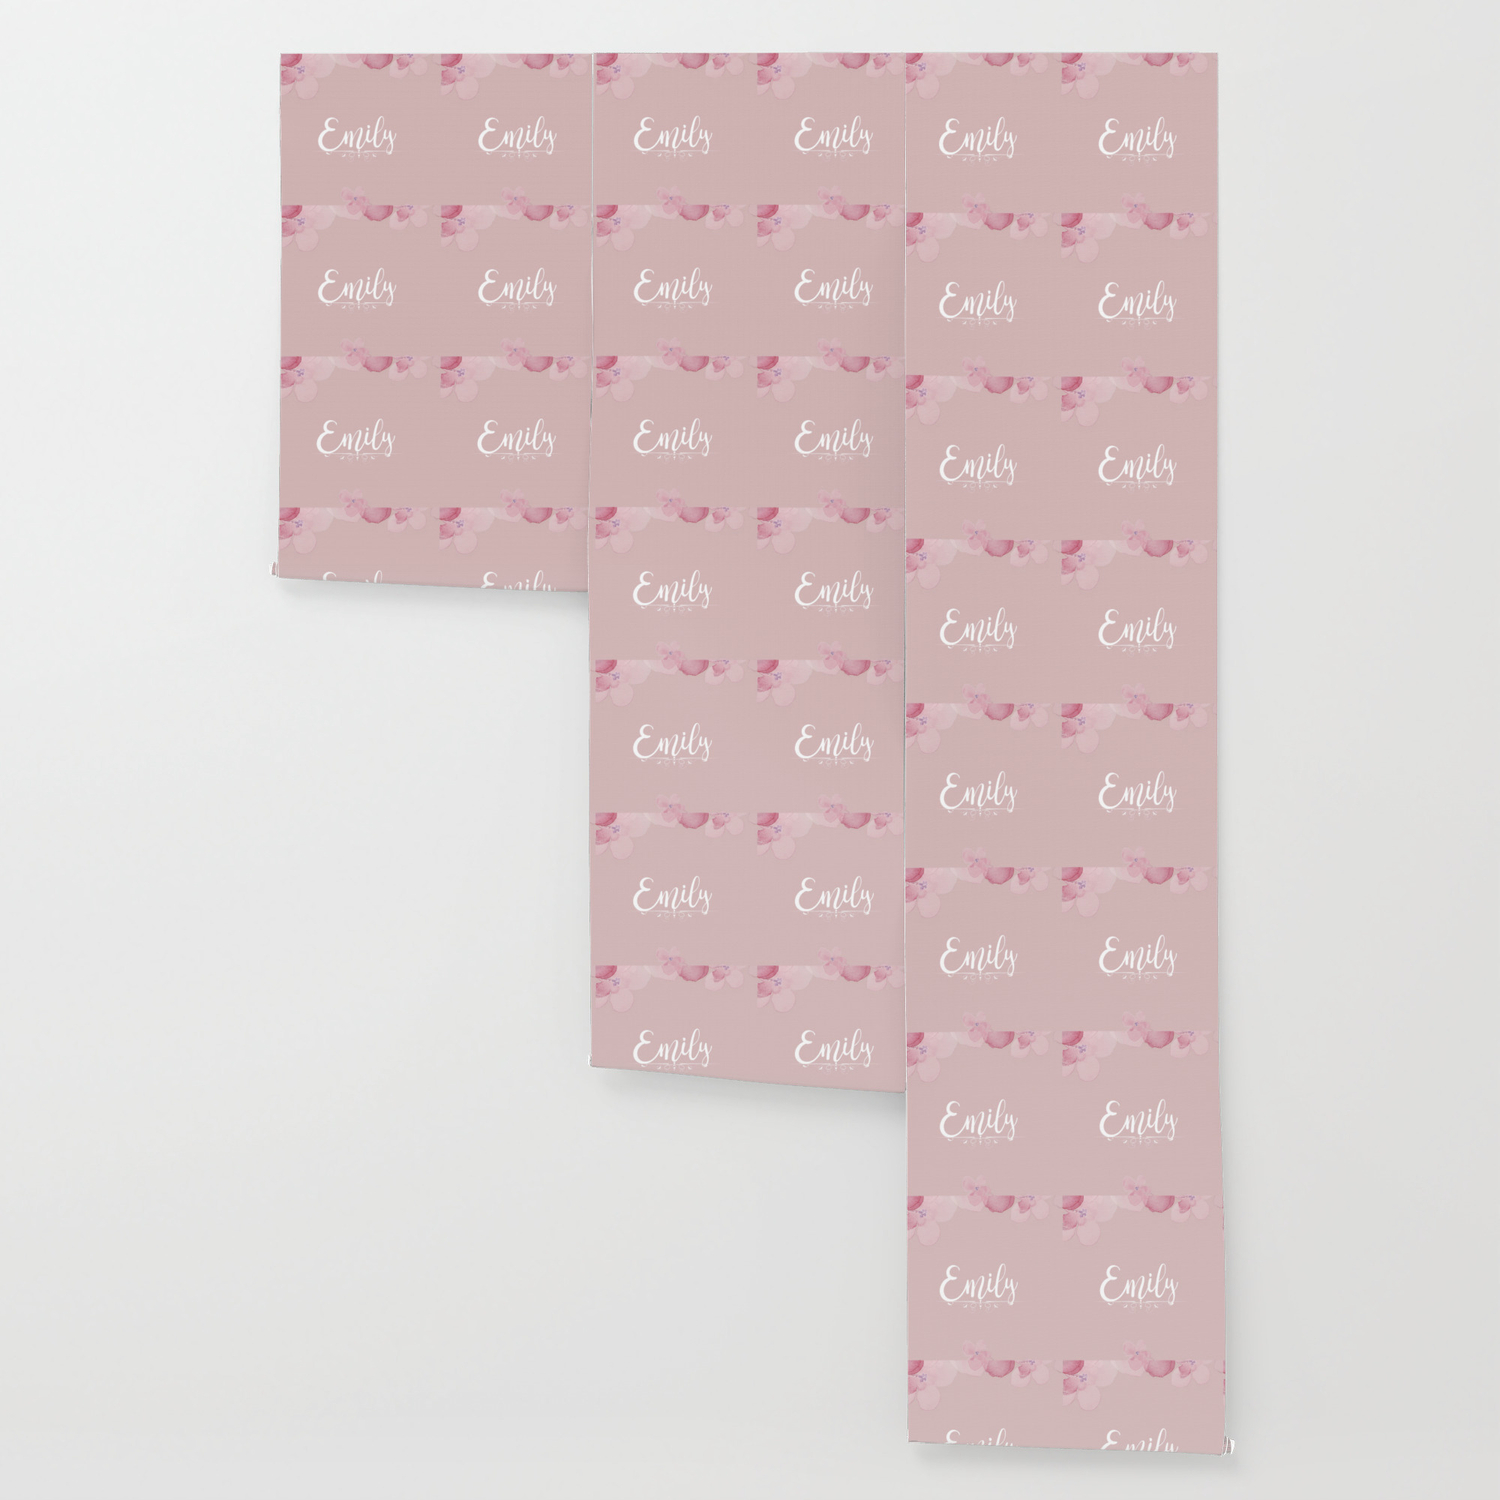 Name Emily Wallpaper by All Arts | Society6